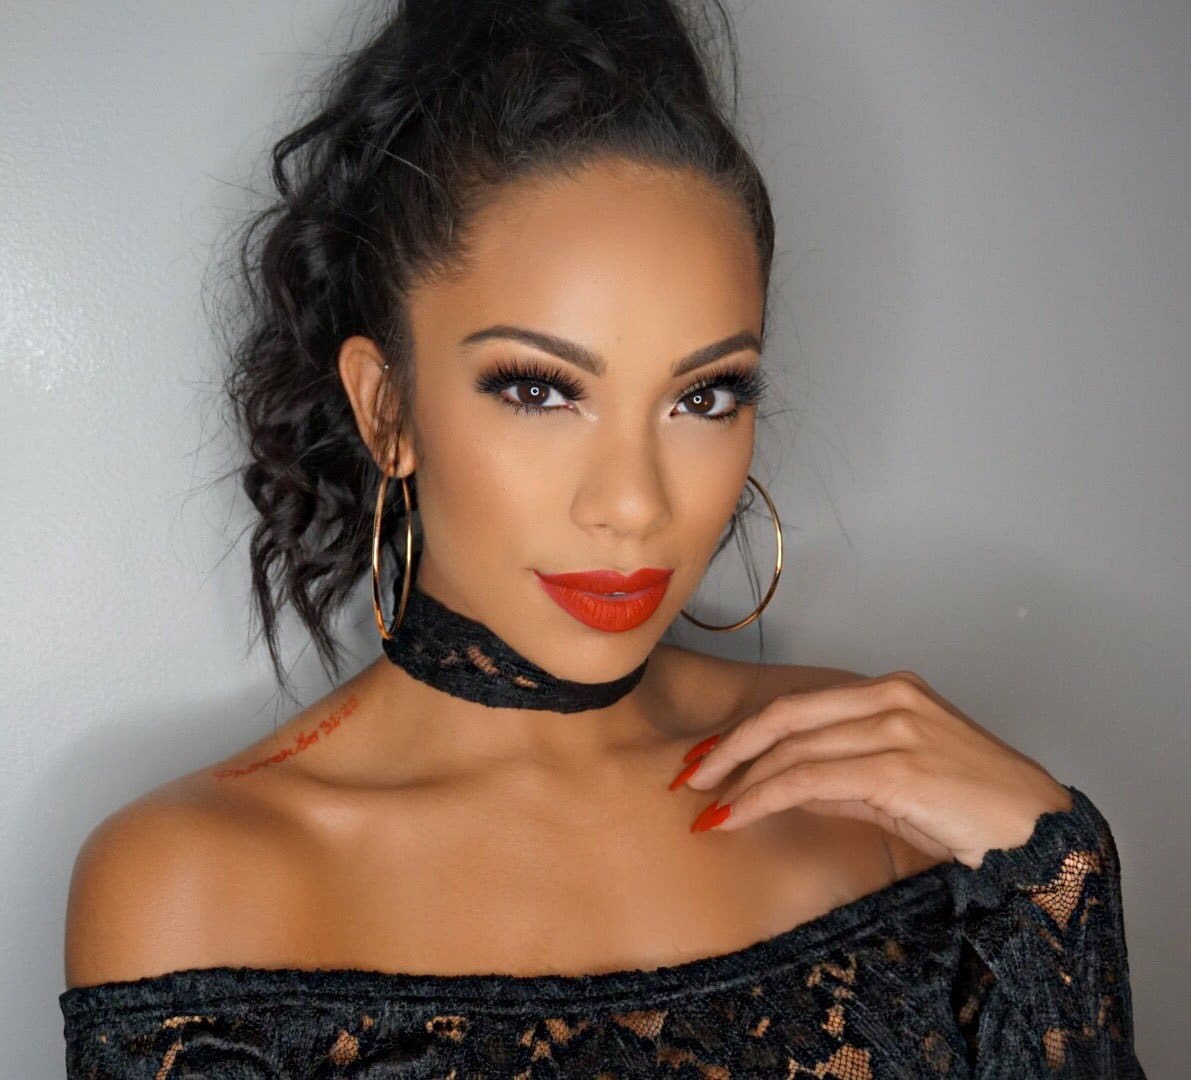 Erica Mena's Fans Cannot Wait To See Her Twinning With Her Baby Girl